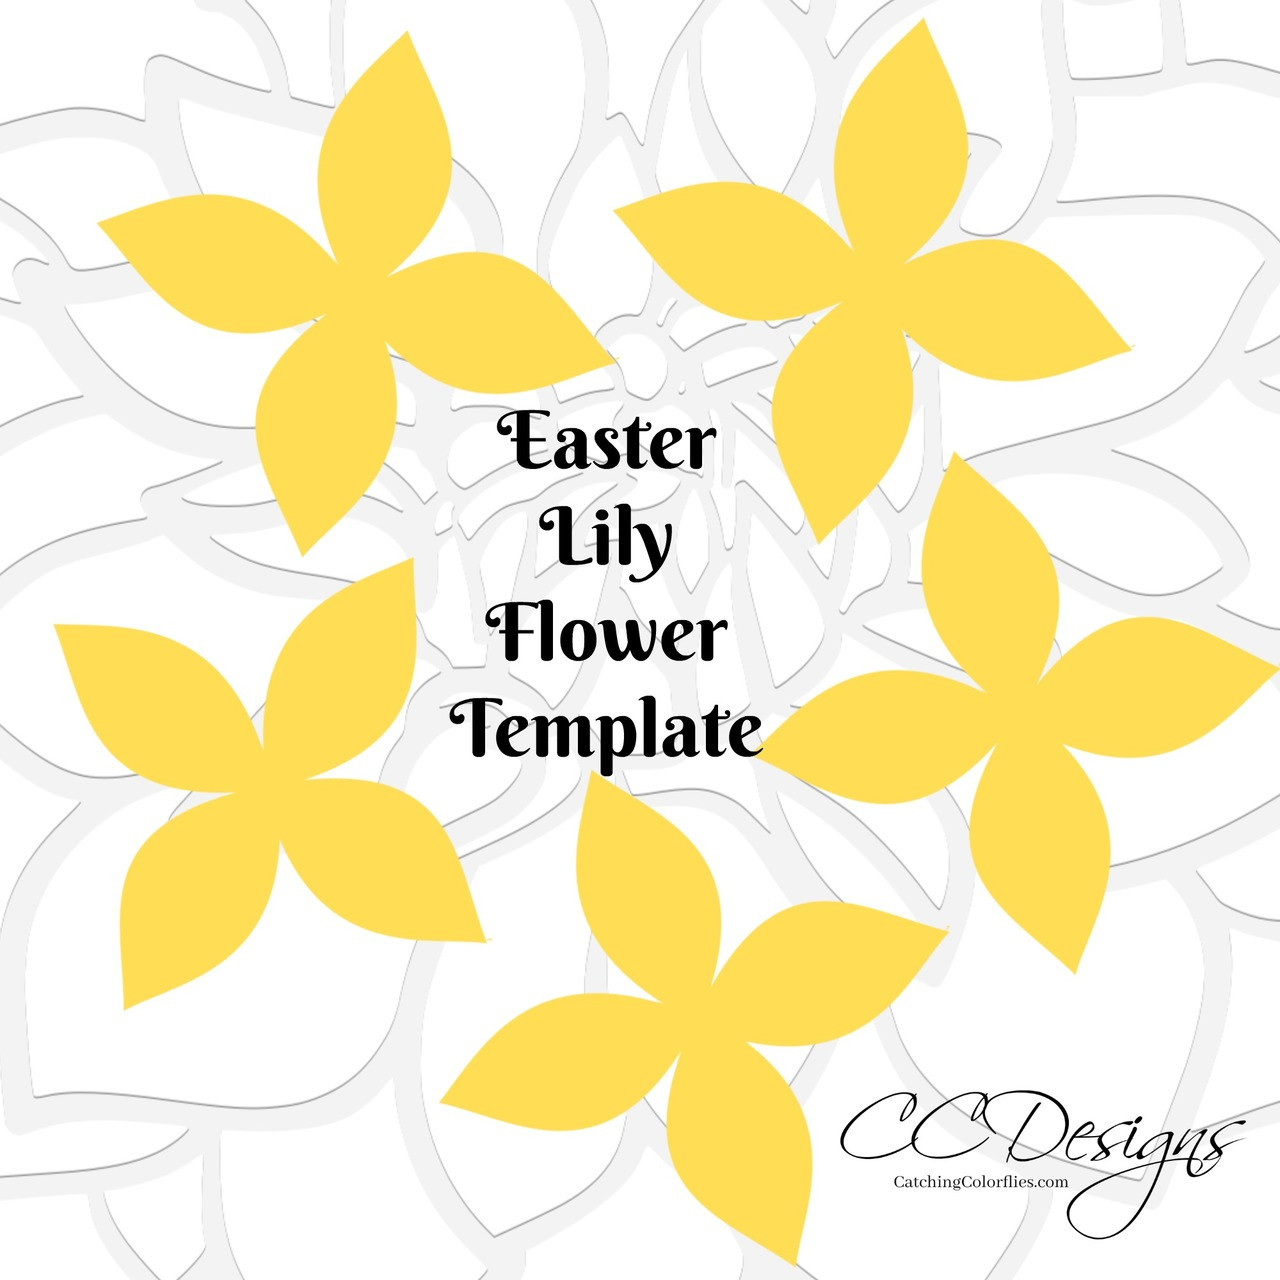 Download Easter Lily Flower Templates - Catching Colorflies